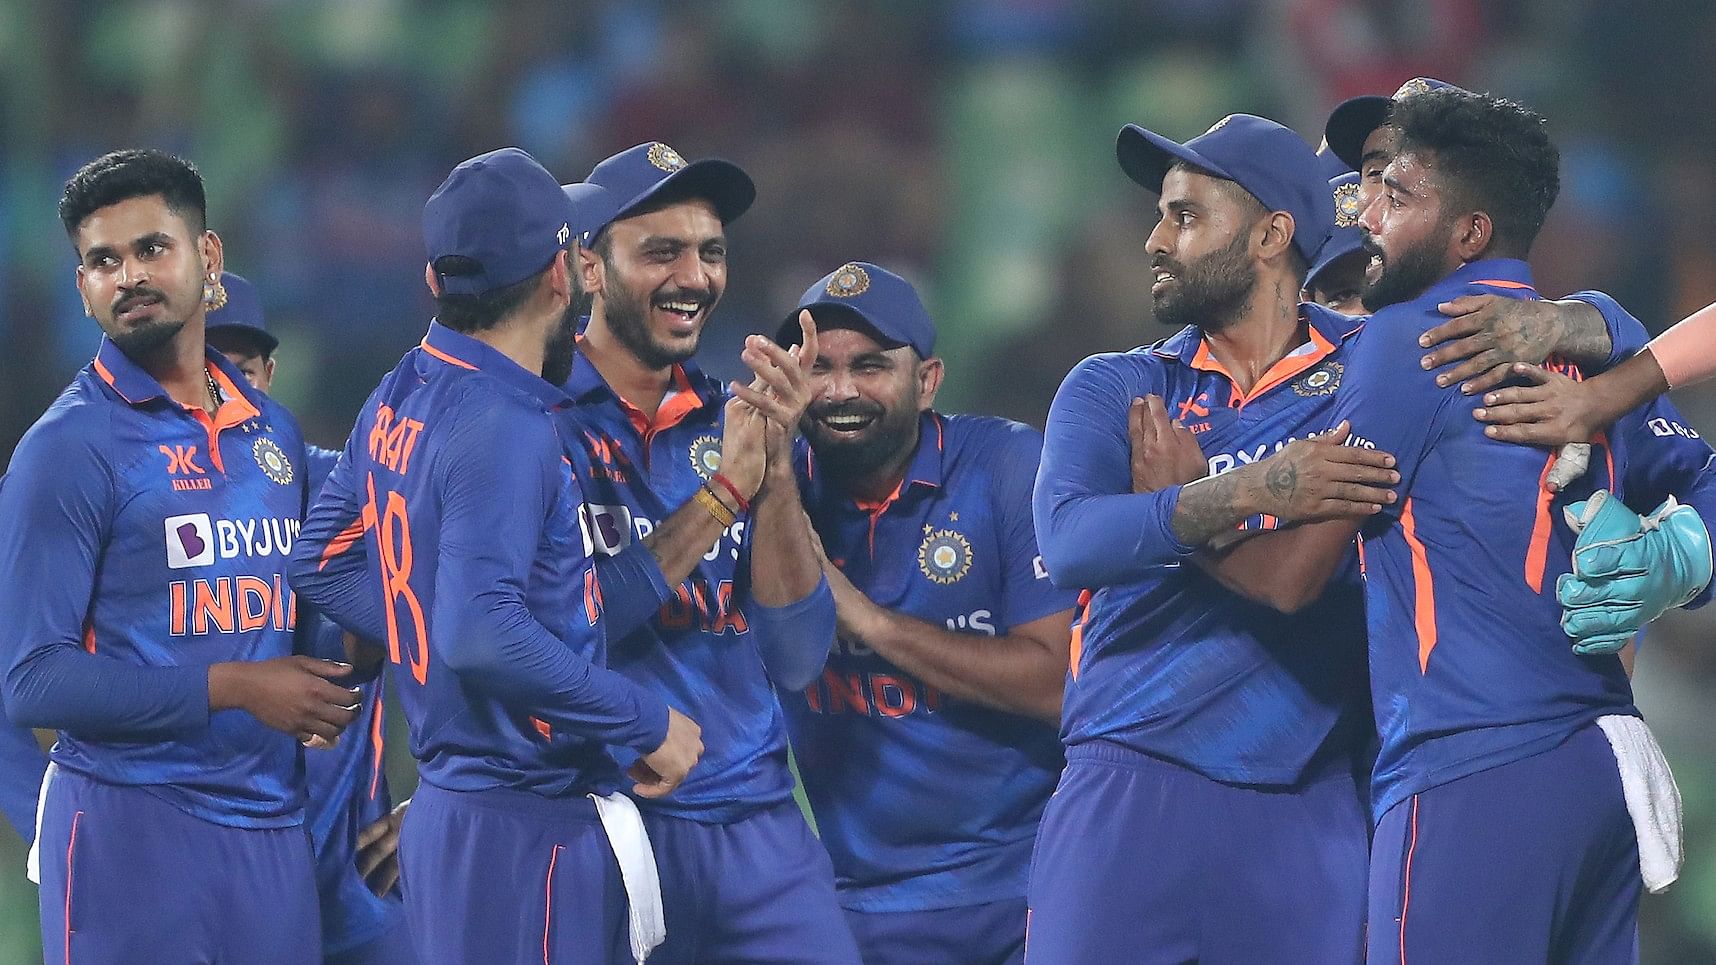 <div class="paragraphs"><p>Photo gallery of India's 317-run victory over Sri Lanka in the third ODI.</p></div>